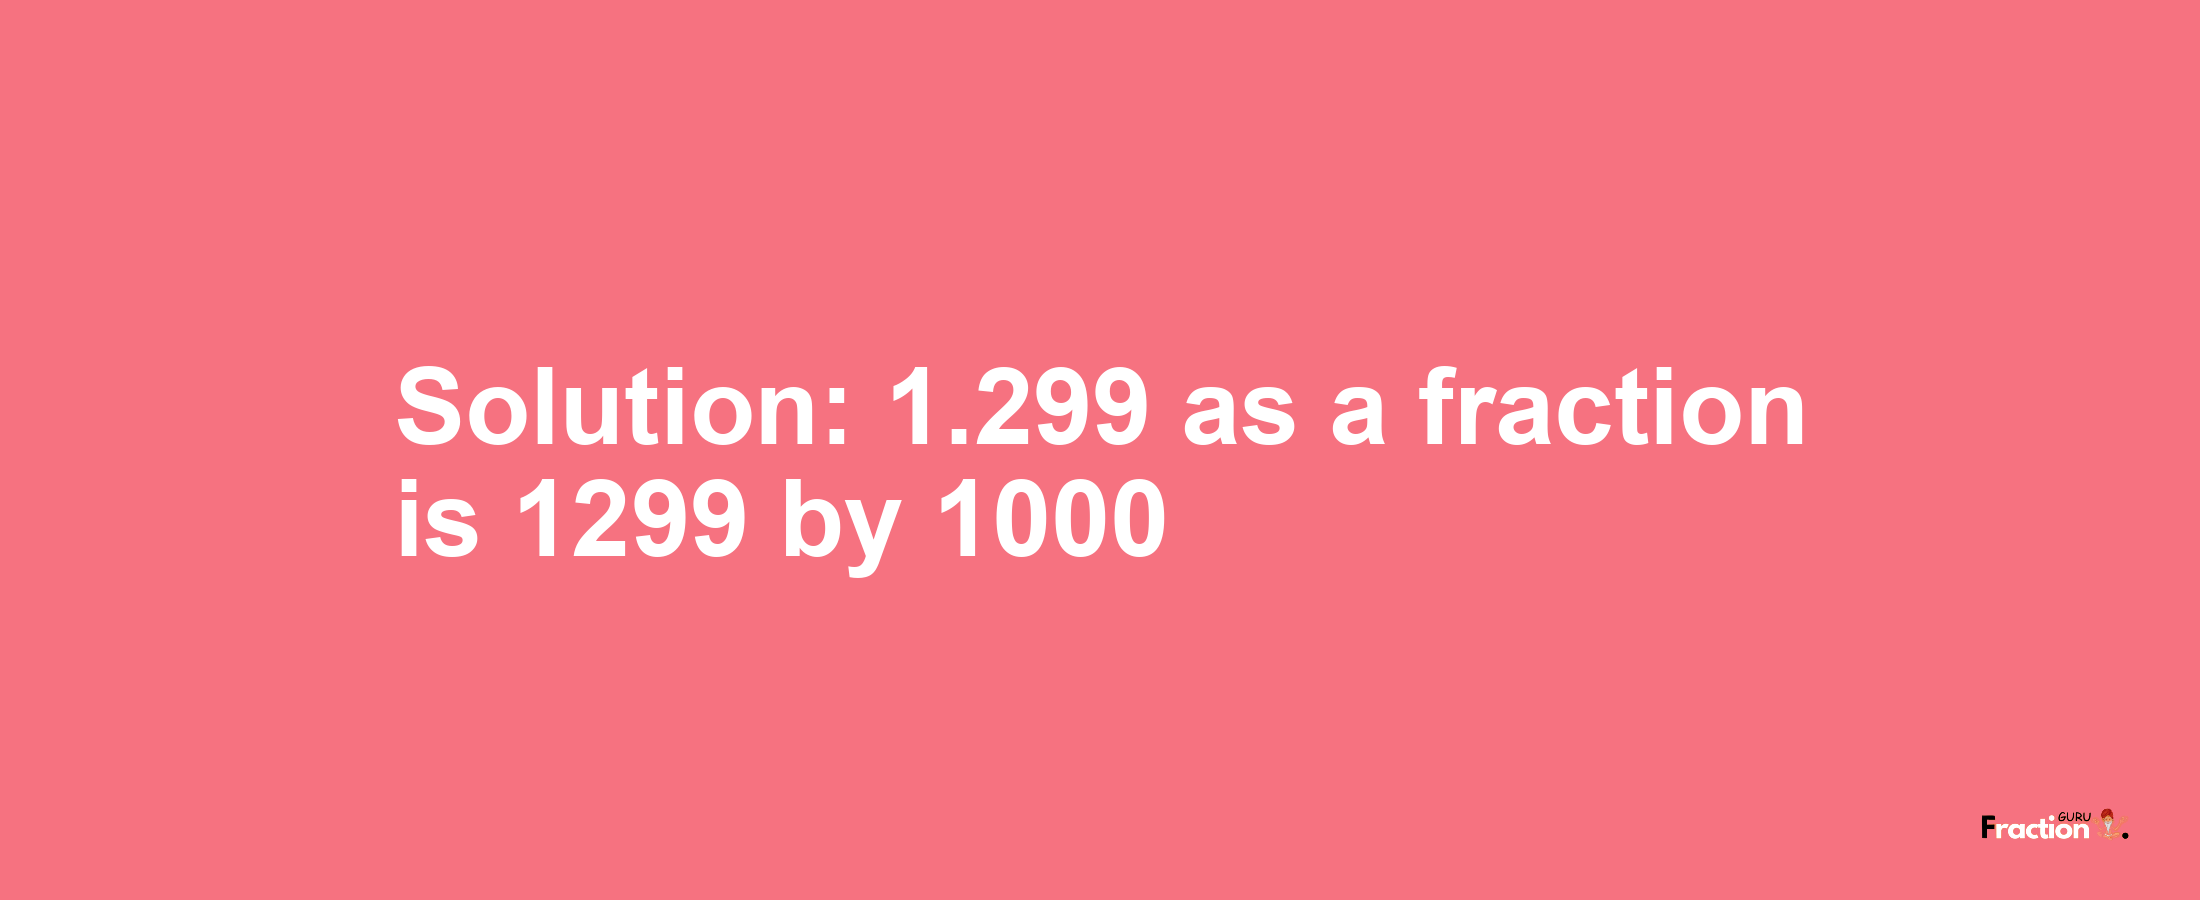 Solution:1.299 as a fraction is 1299/1000